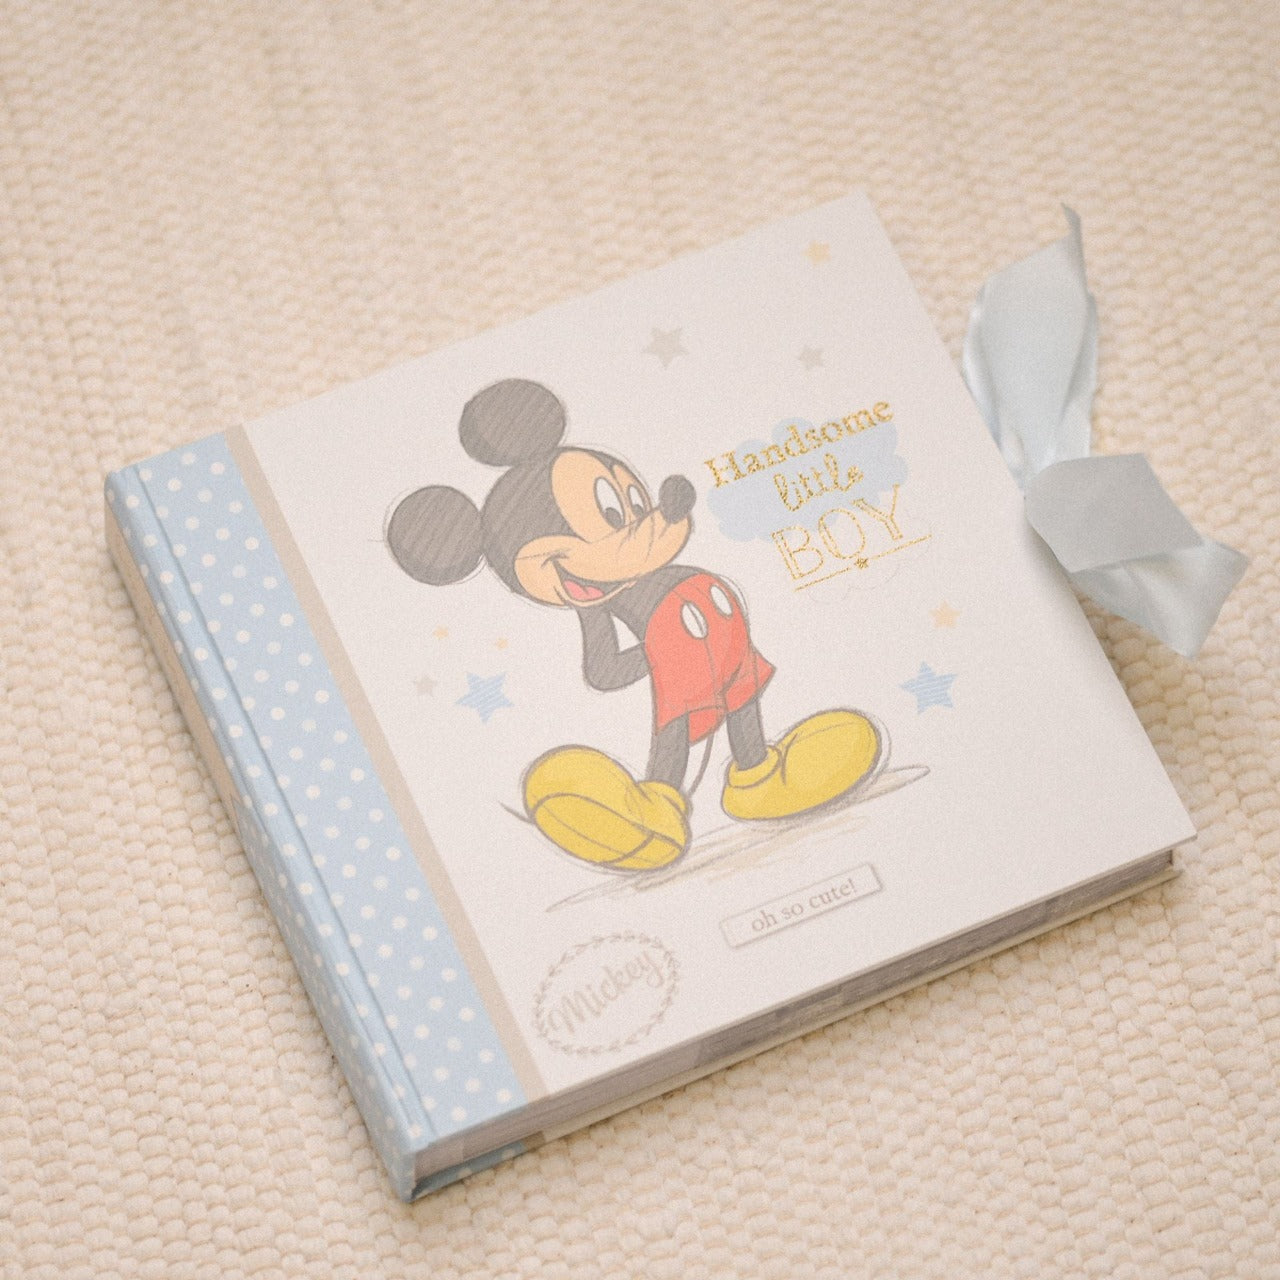 Disney Magical Beginnings Photo Album 4" x 6" Mickey Mouse  Add a touch of magic to your every day with this Magical Beginnings Photo Album.  As part of our range of classic Disney illustration giftware, this photo album displays a beautiful depiction of the classic Disney character, Mickey Mouse, 'Handsome Little Boy' gold glitter lettering, space for fifty 4" x 6" photos, personalisable title page and a blue bow closure.